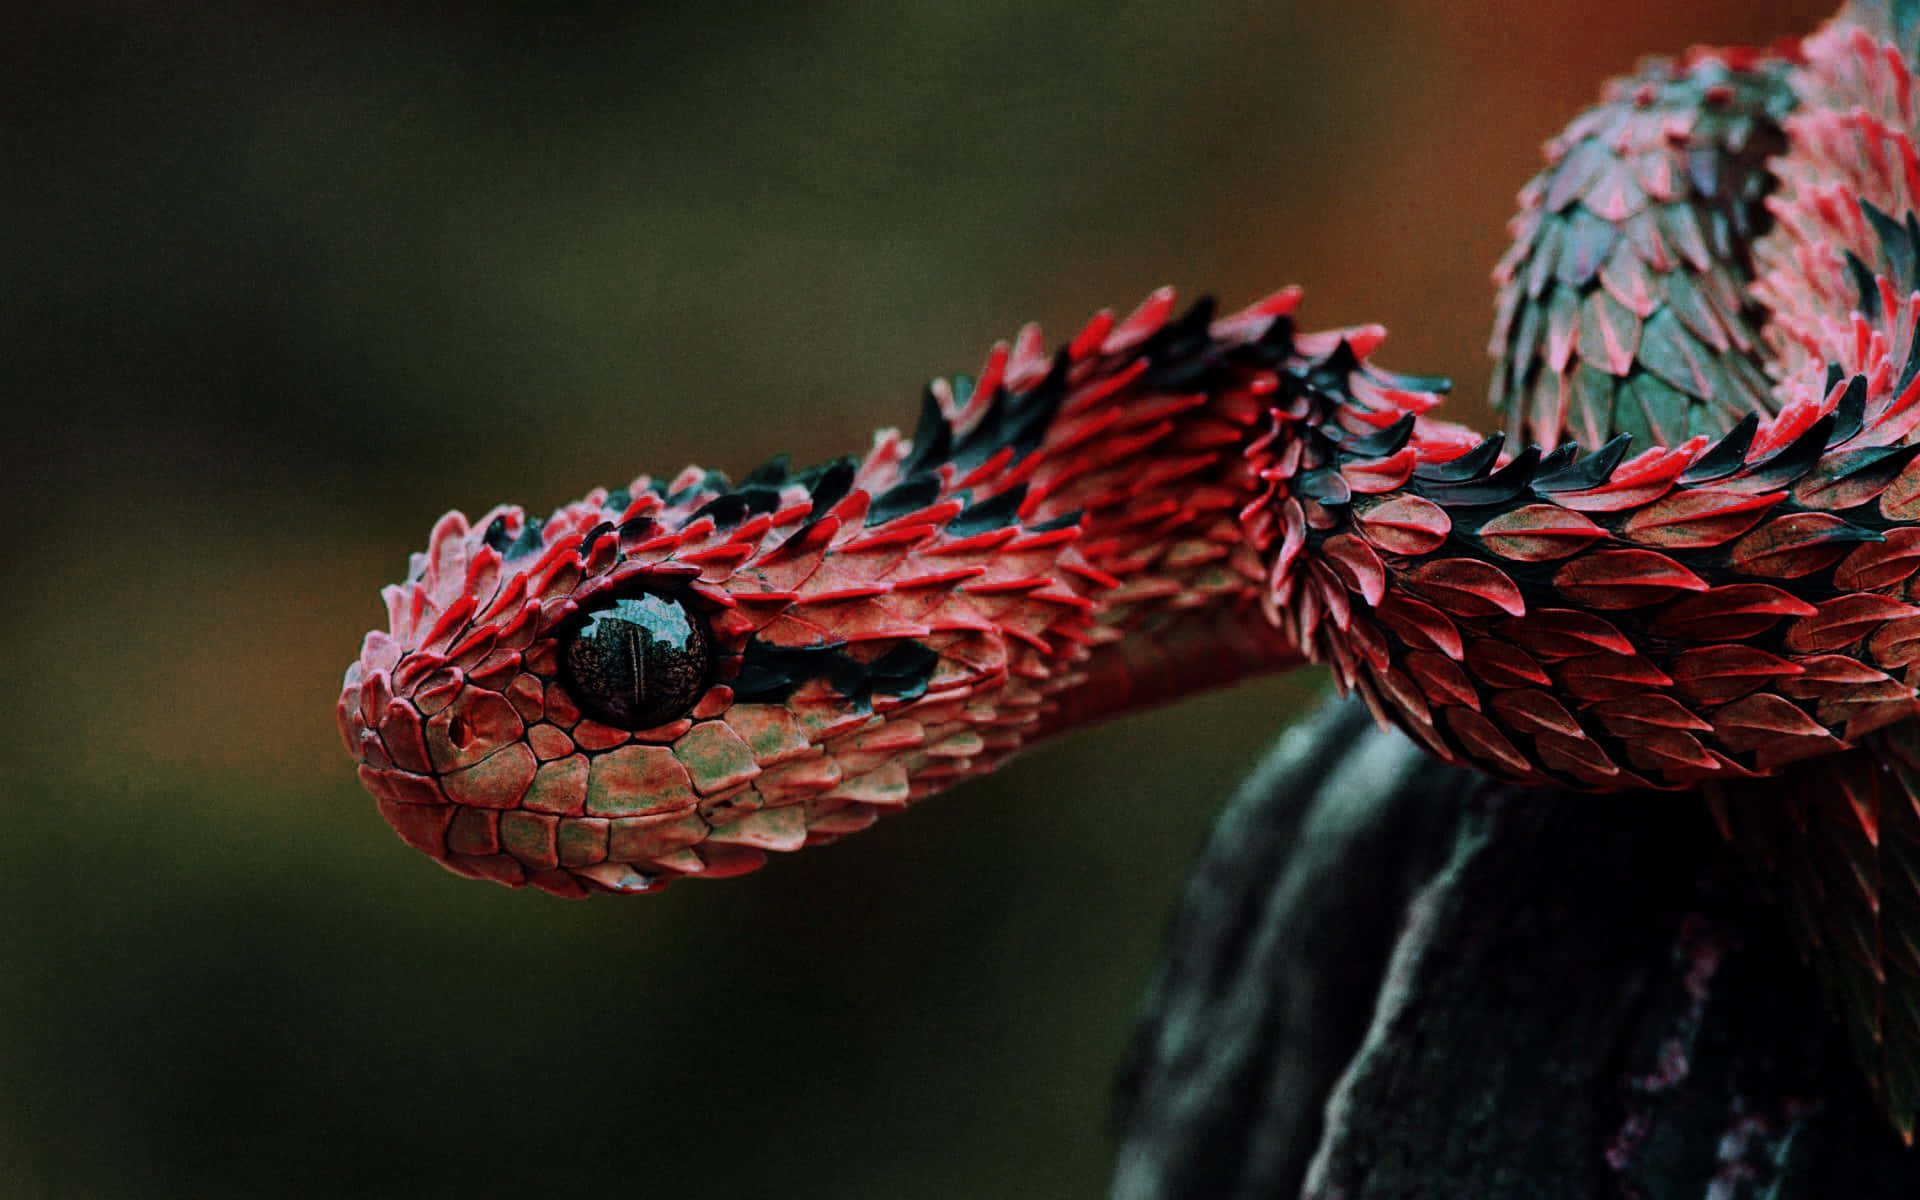 Clothed in Its Armor, This Snake Is Ready to Face Its Challenges